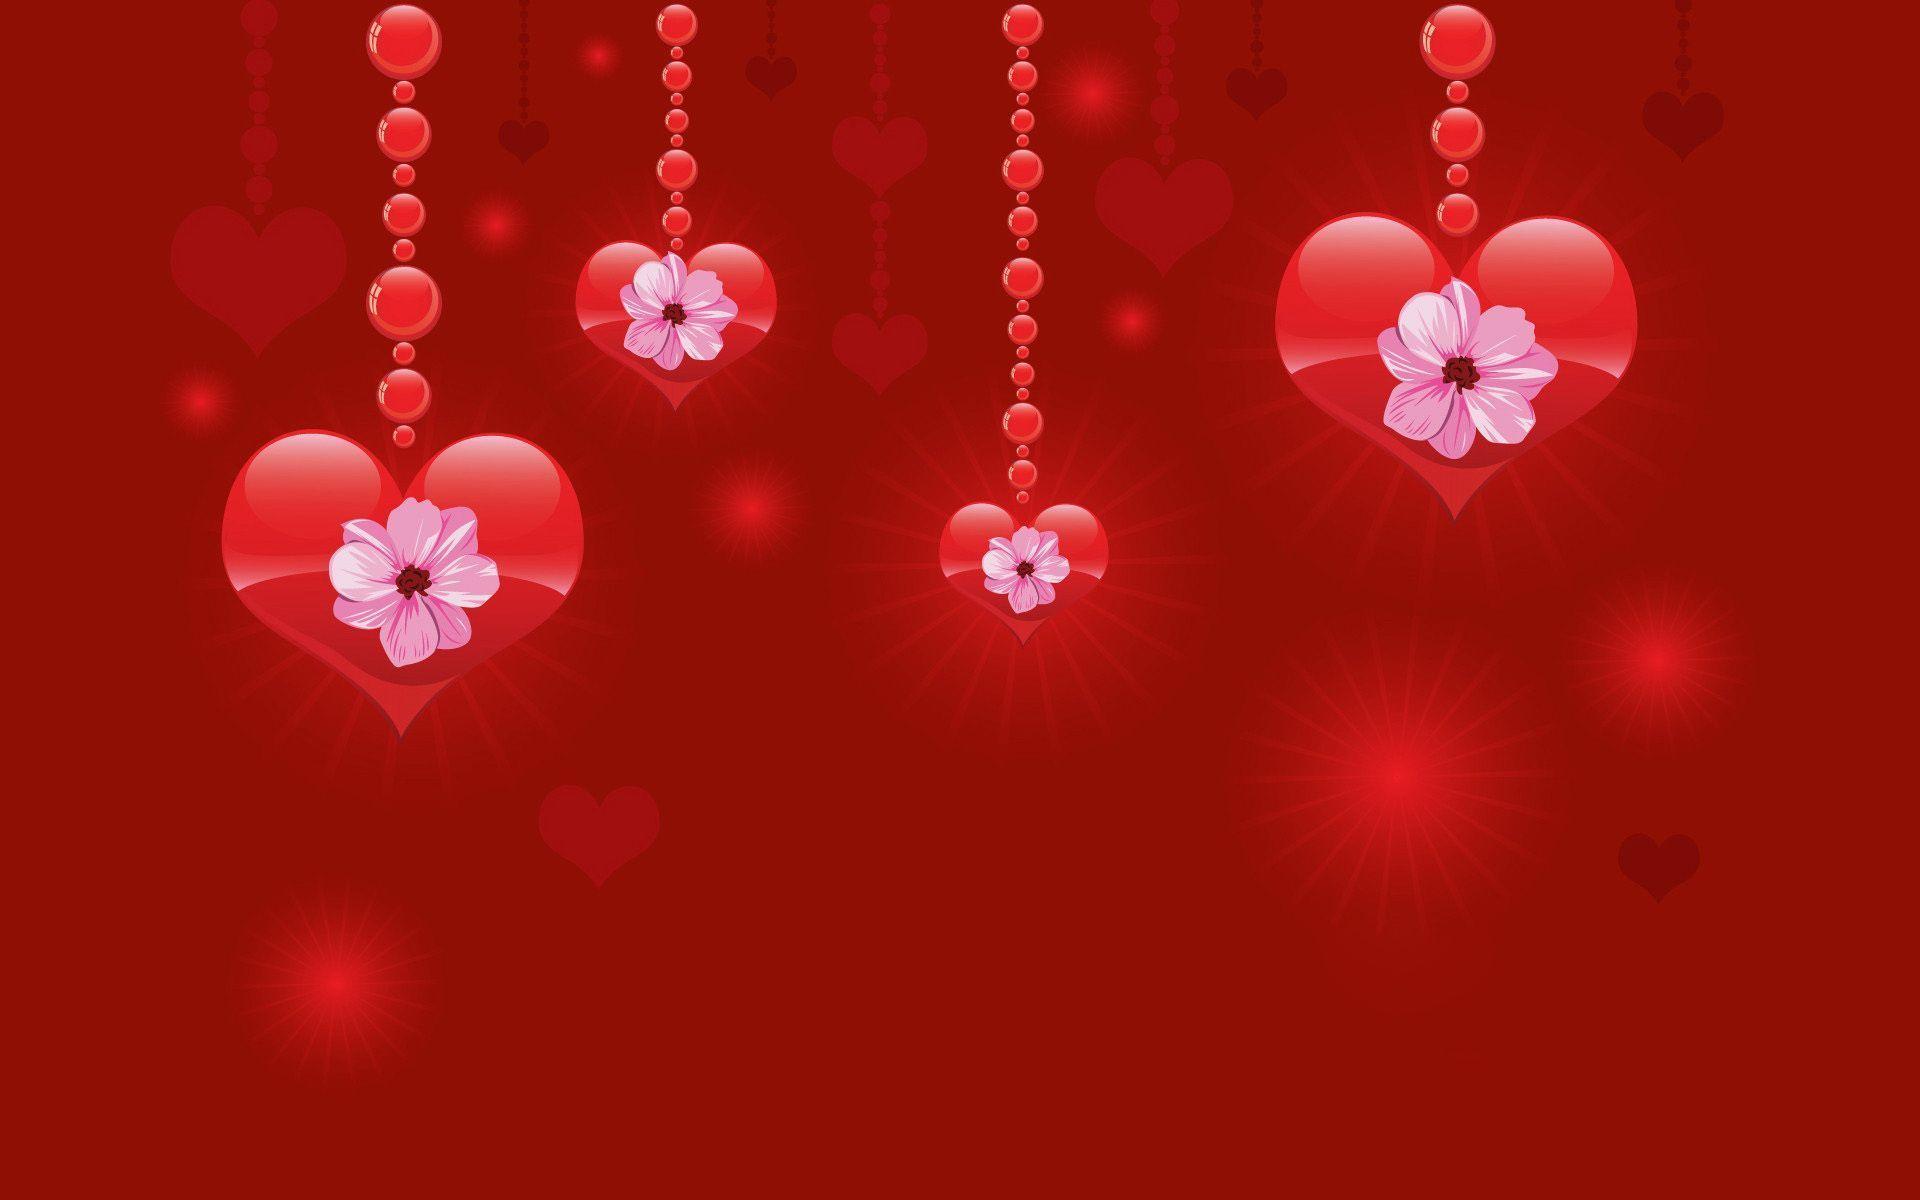 Happy Valentines Day Wallpaper Image in English. Valentinesday